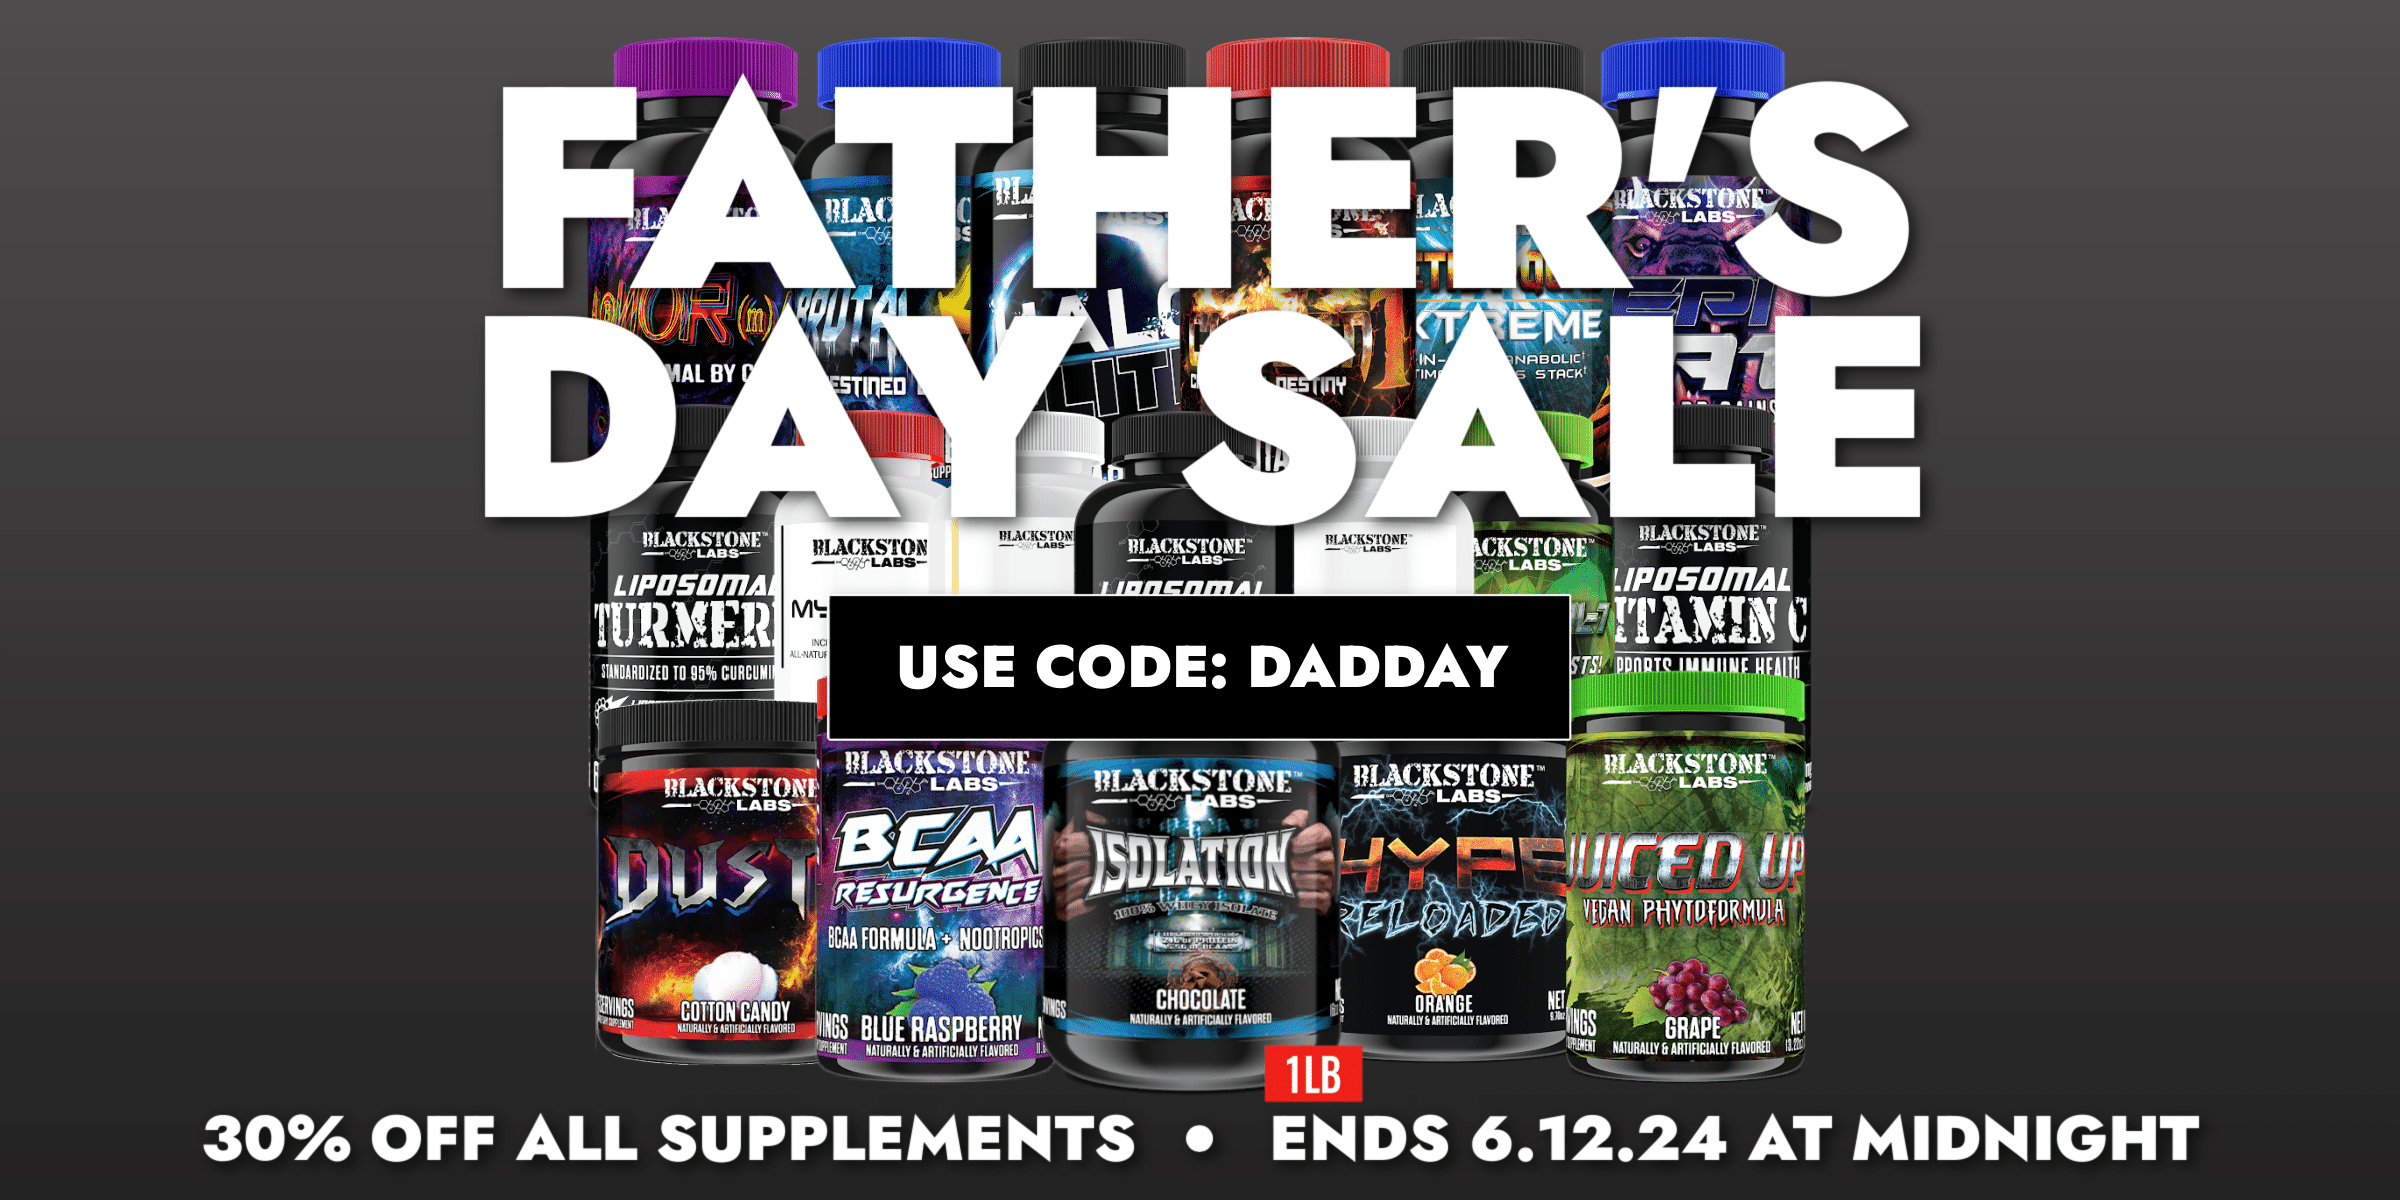 Father's Day Sale: 30% Off All Supplements. Use Code DADDAY
Ends on 06/12/24 at midnight